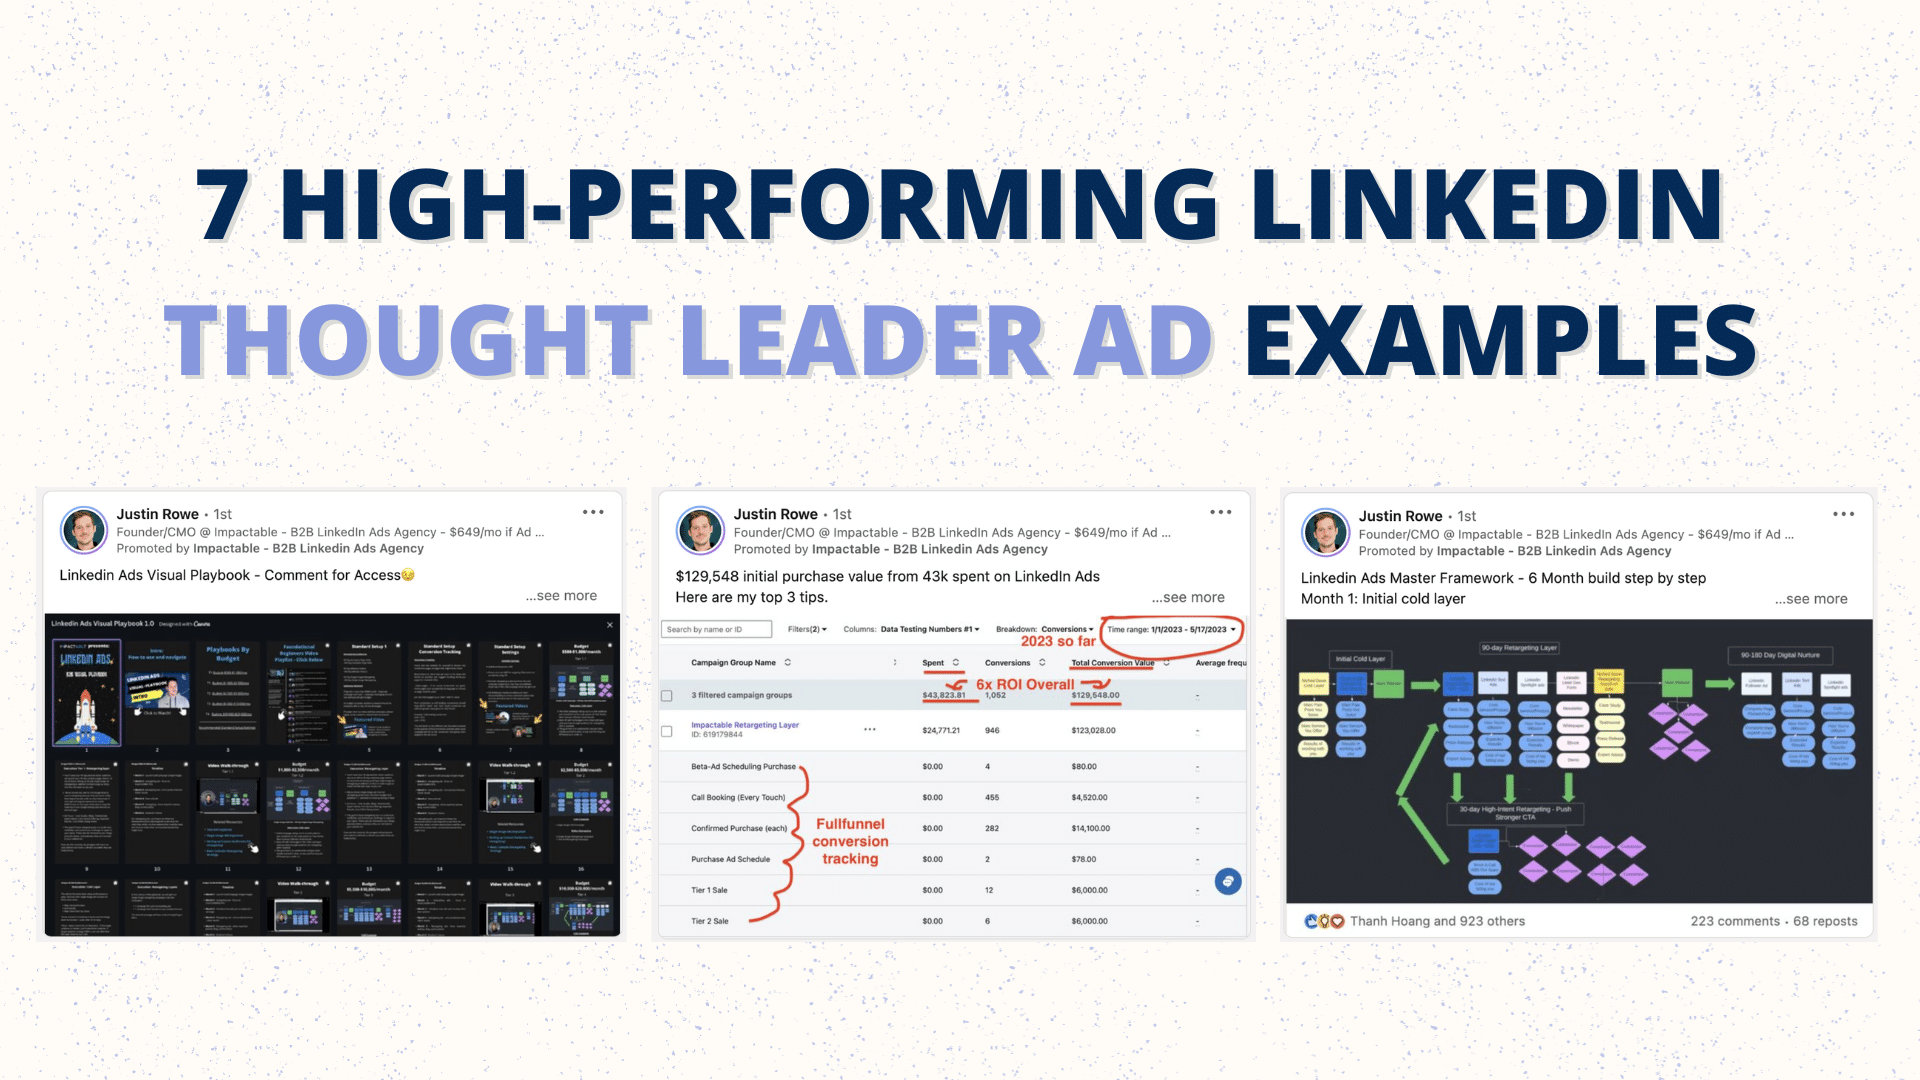 LinkedIn Thought Leader Ad Examples